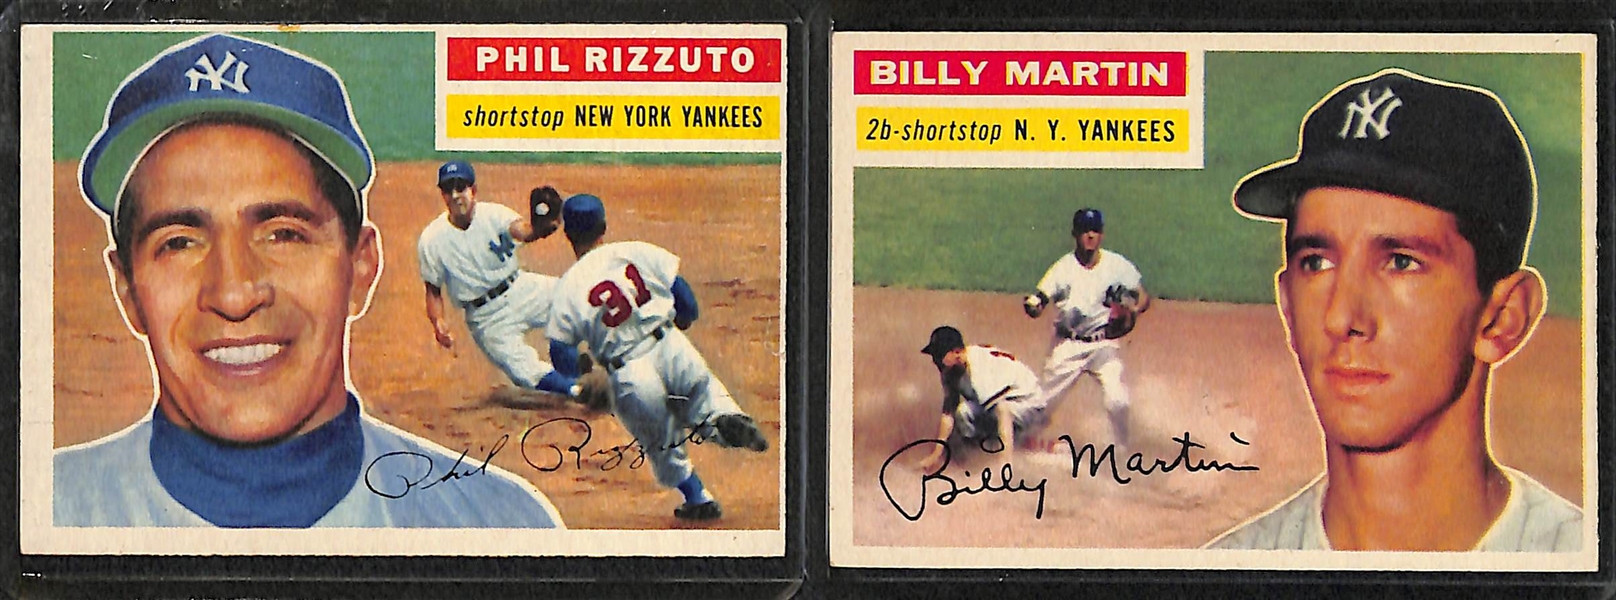 Lot of 9 - 1956 Topps Baseball Cards w. Mickey Mantle & Phil Rizzuto